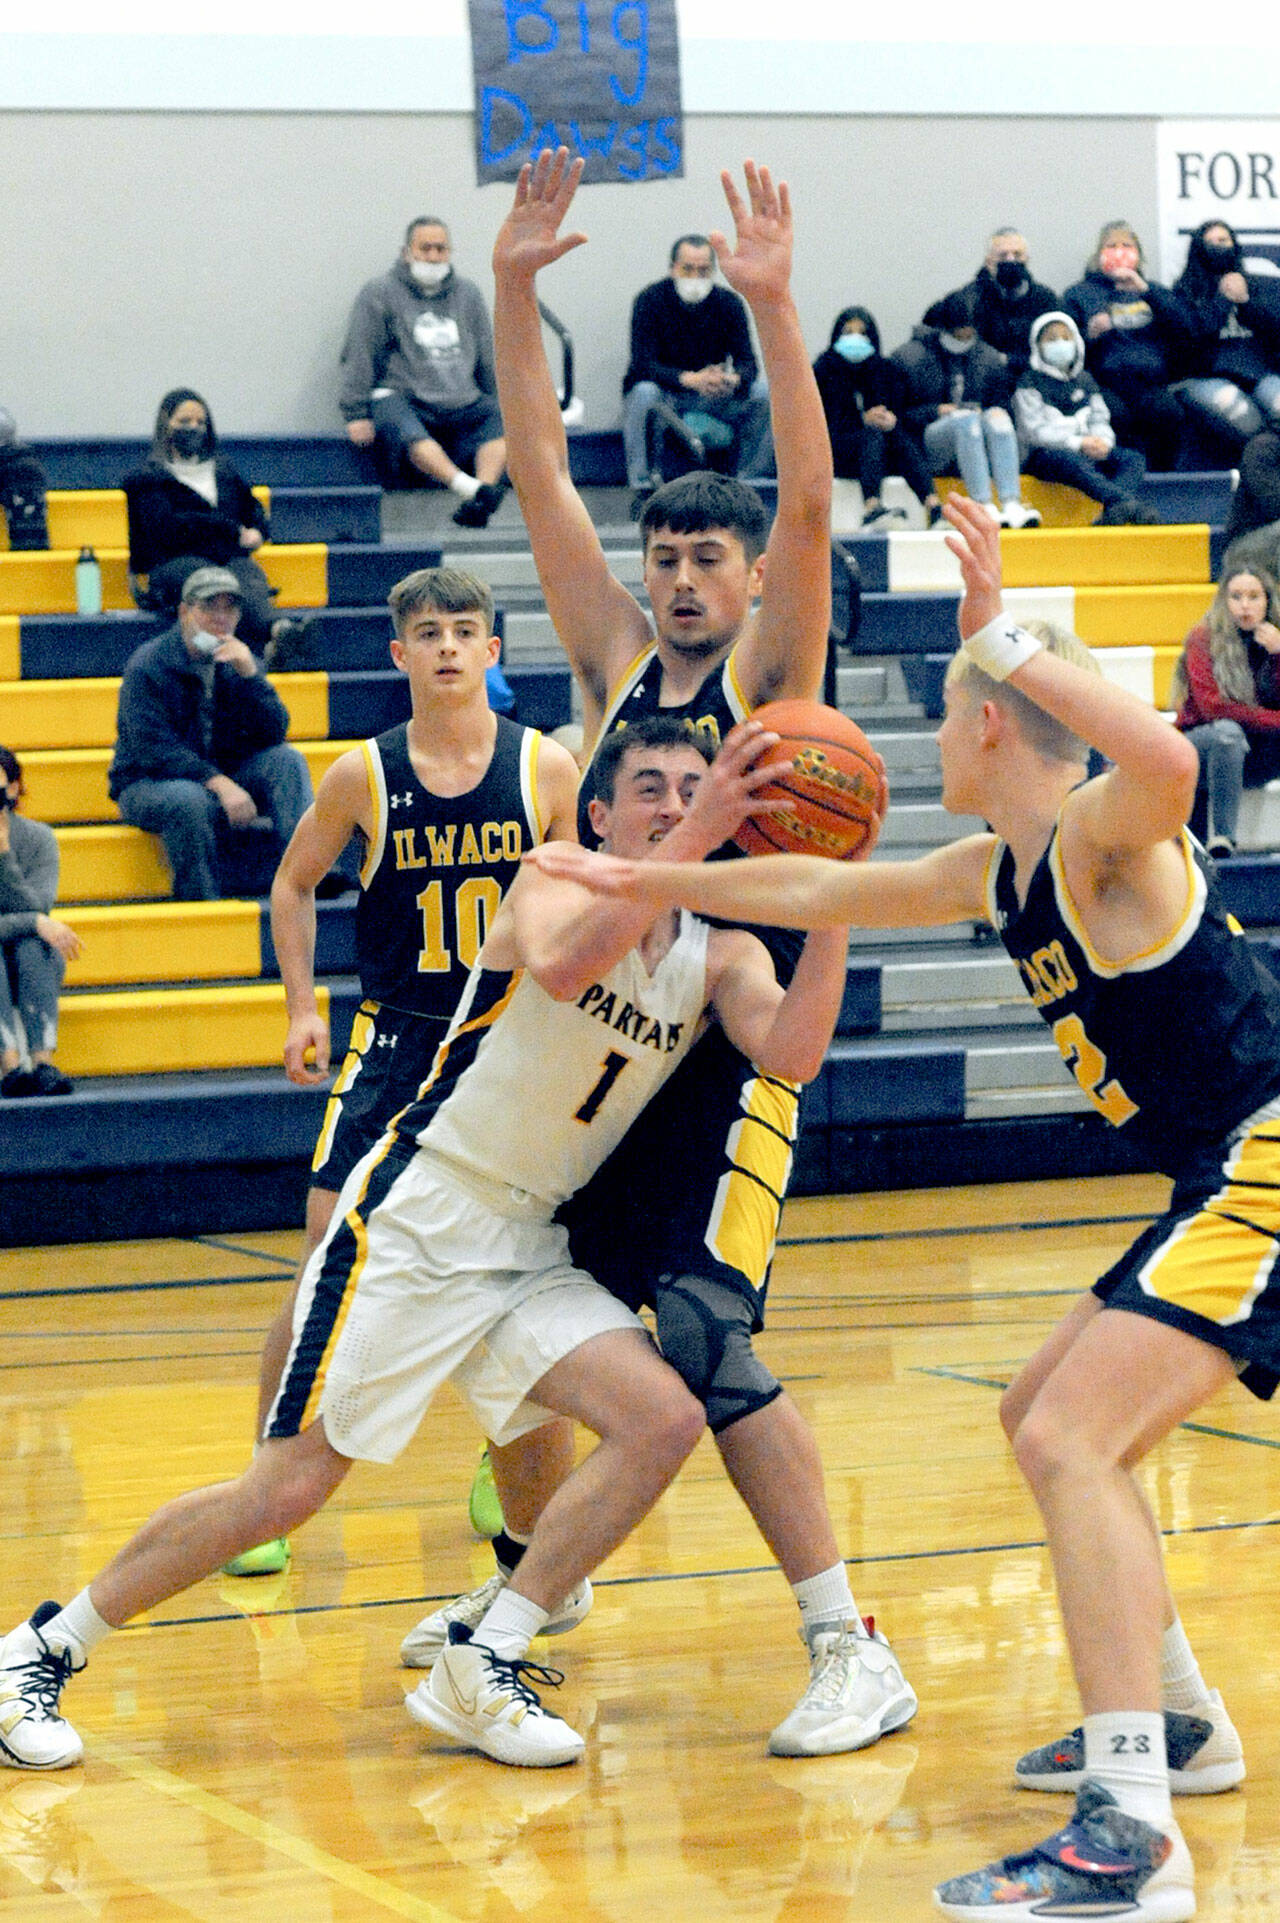 Forks’ Riley Pursley (1), along with his Spartans teammates ran into Ilwaco’s tough defense in a 58-38 loss to the Fishermen at home Wednesday. Pursley had 19 points in his season debut. (Lonnie Archibald/for Peninsula Daily News)